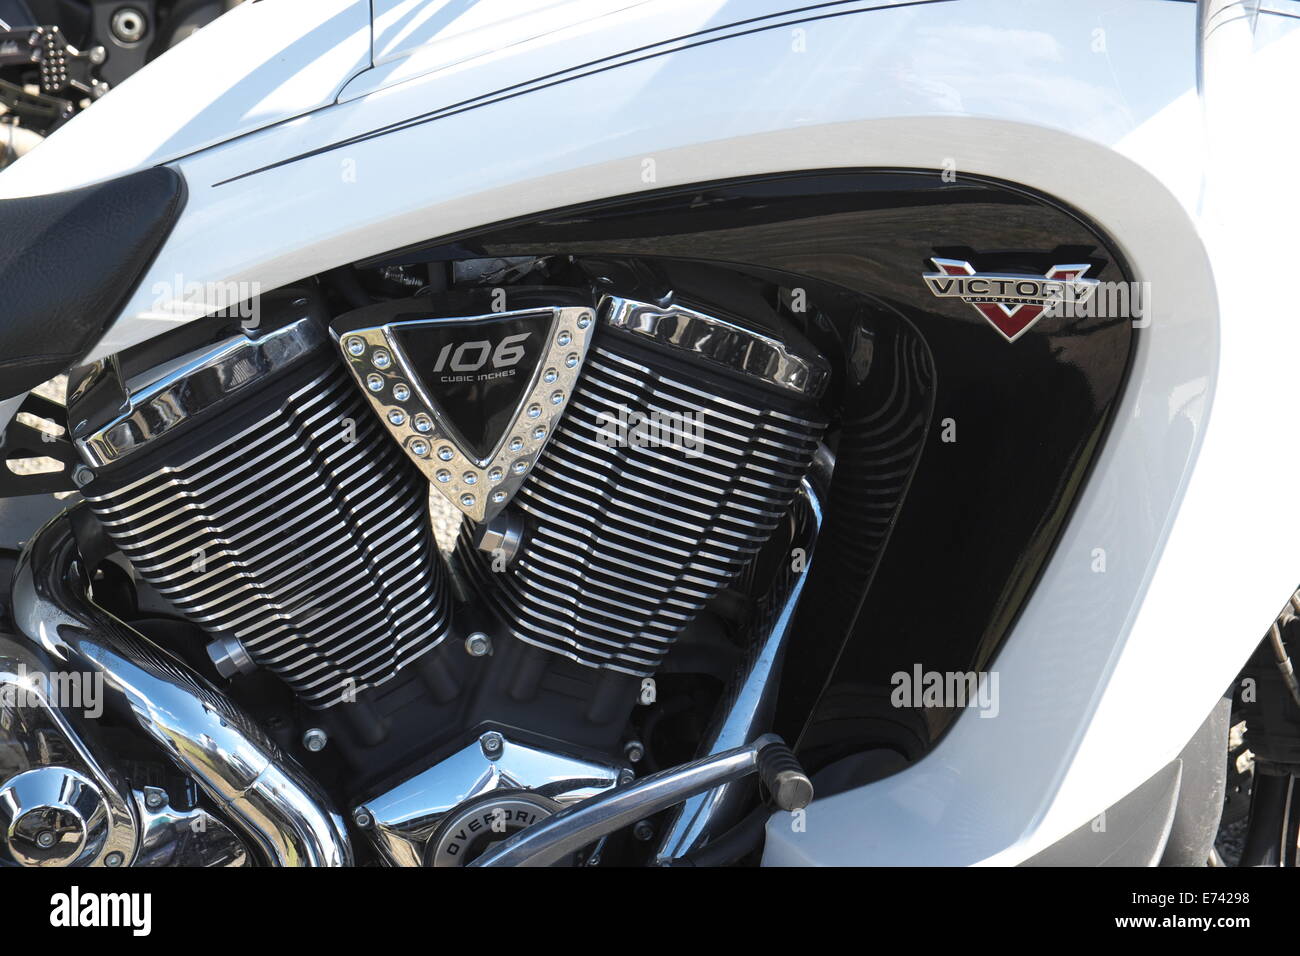 victory motorcycle and close up of its engine, shot taken in sydney australia Stock Photo